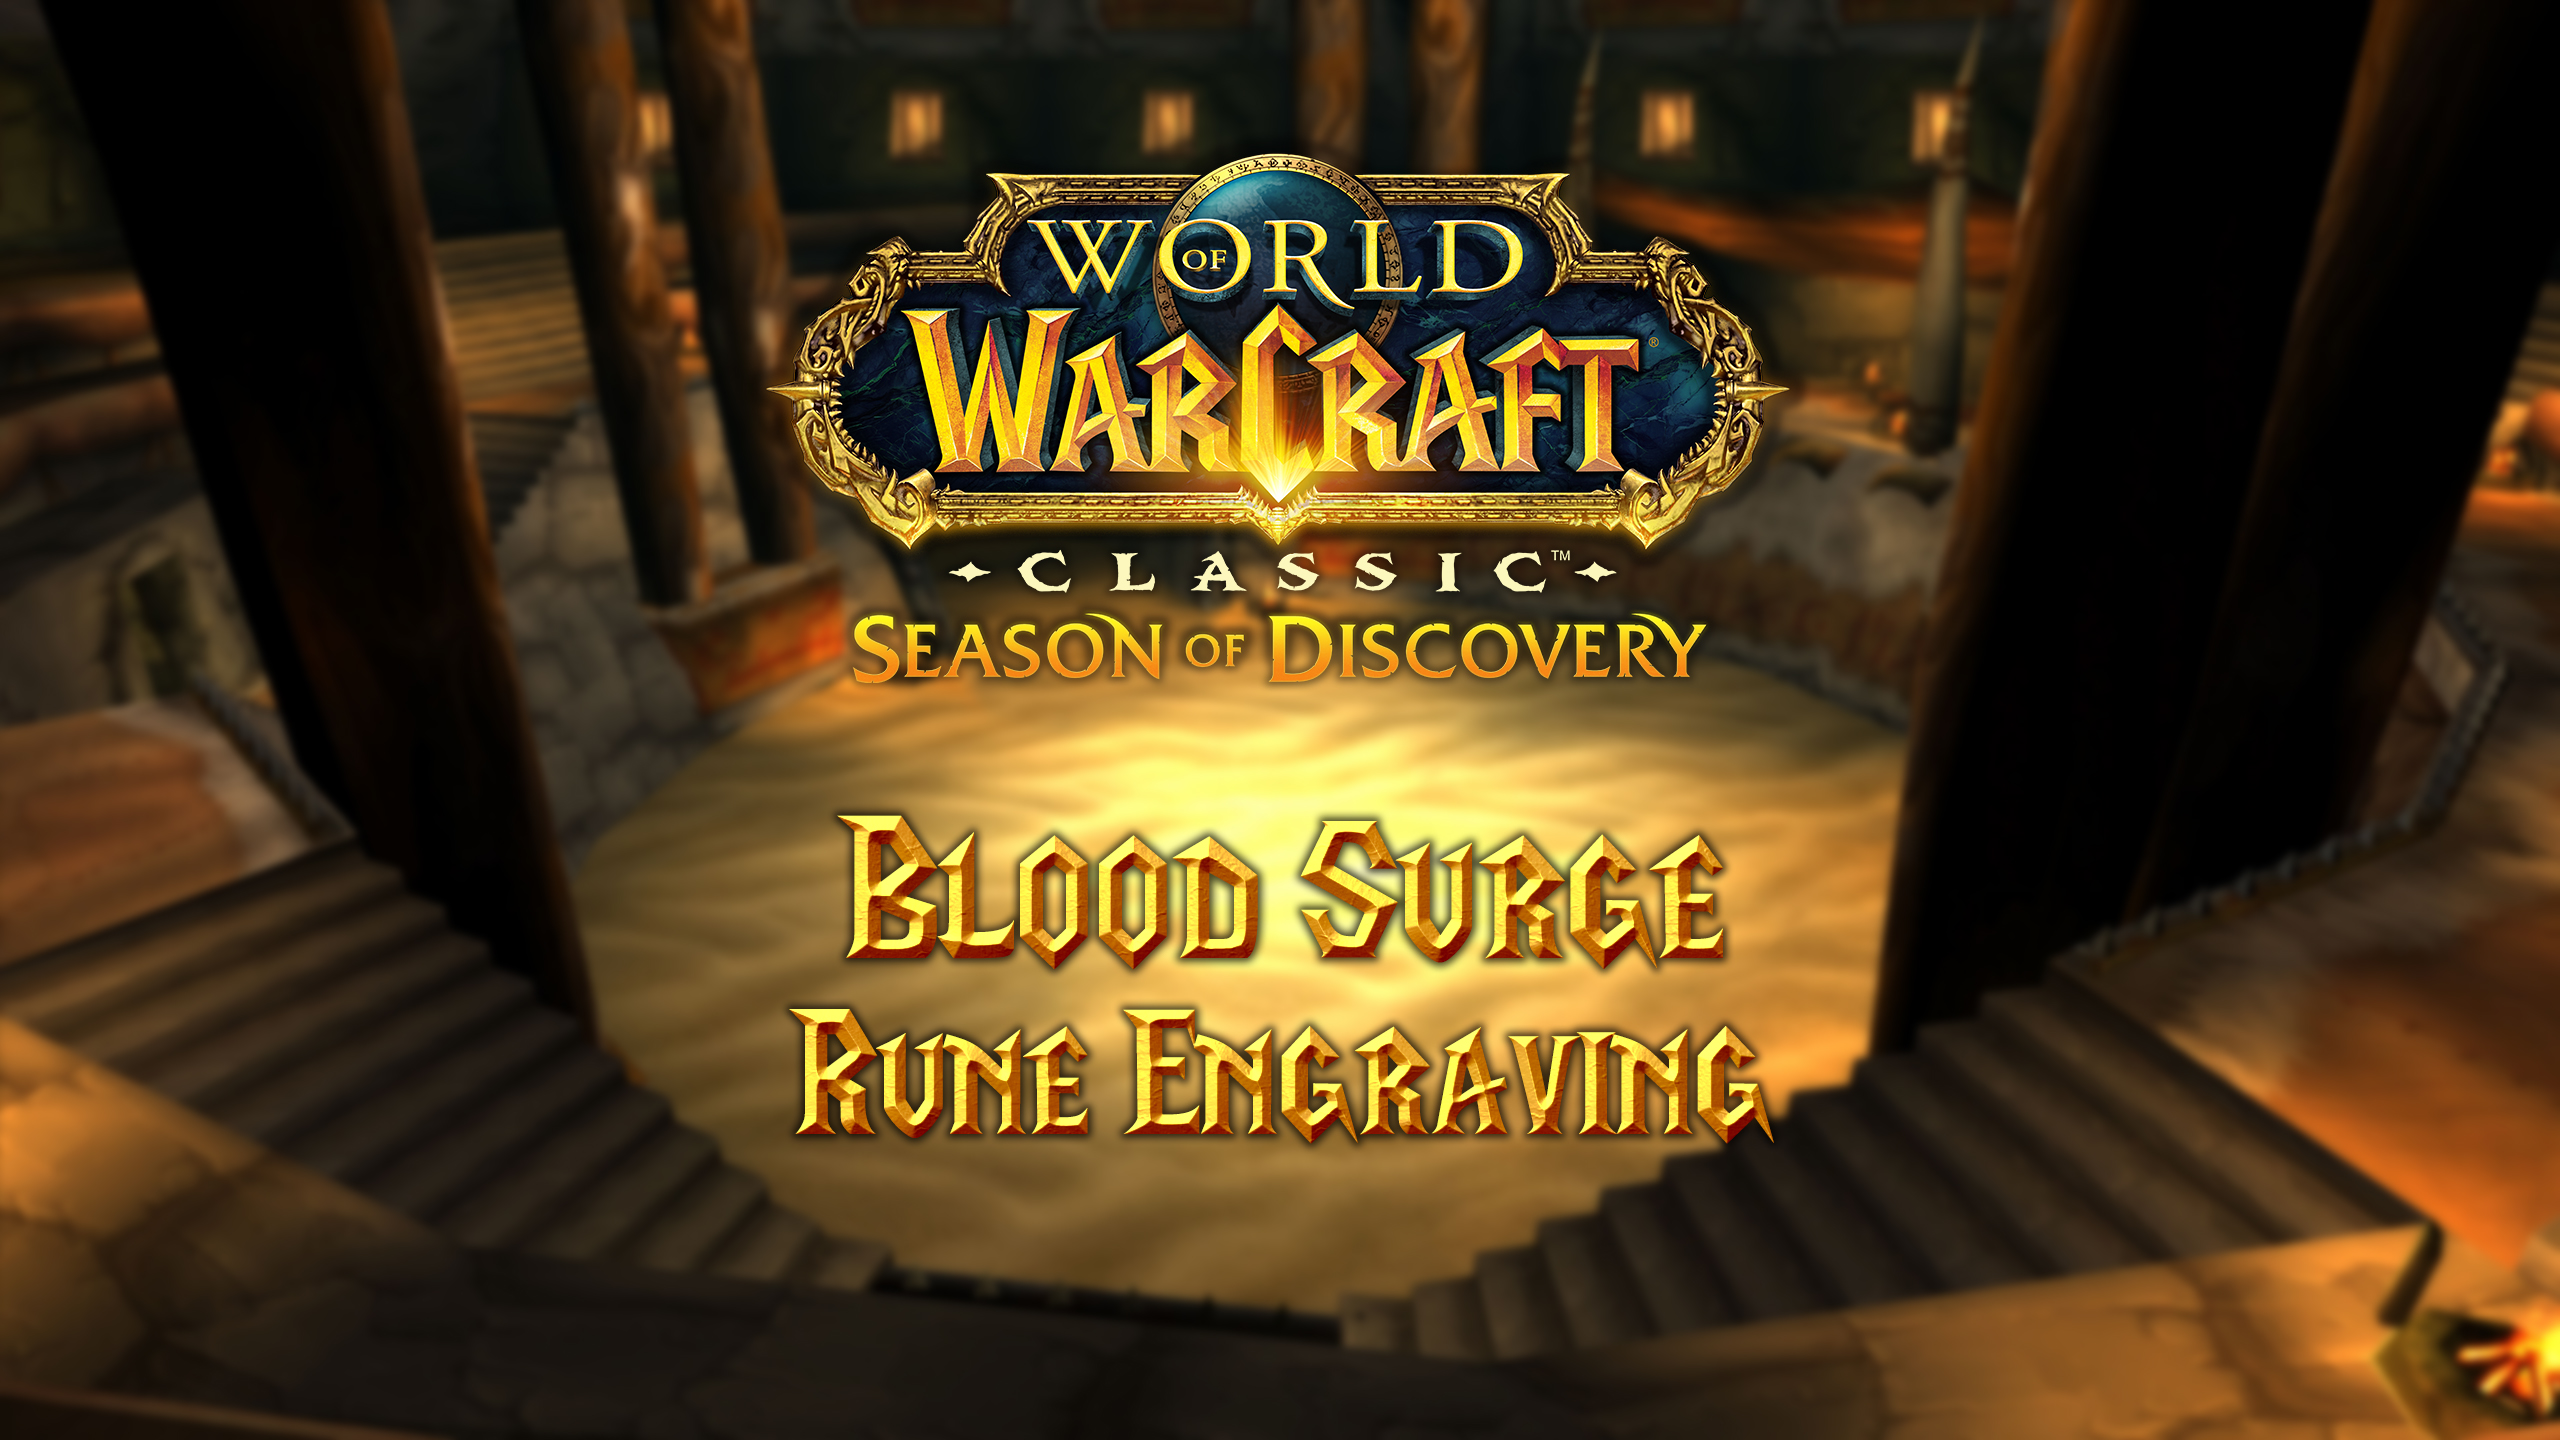 Where to Find the Blood Surge Rune in Season of Discovery (SoD)